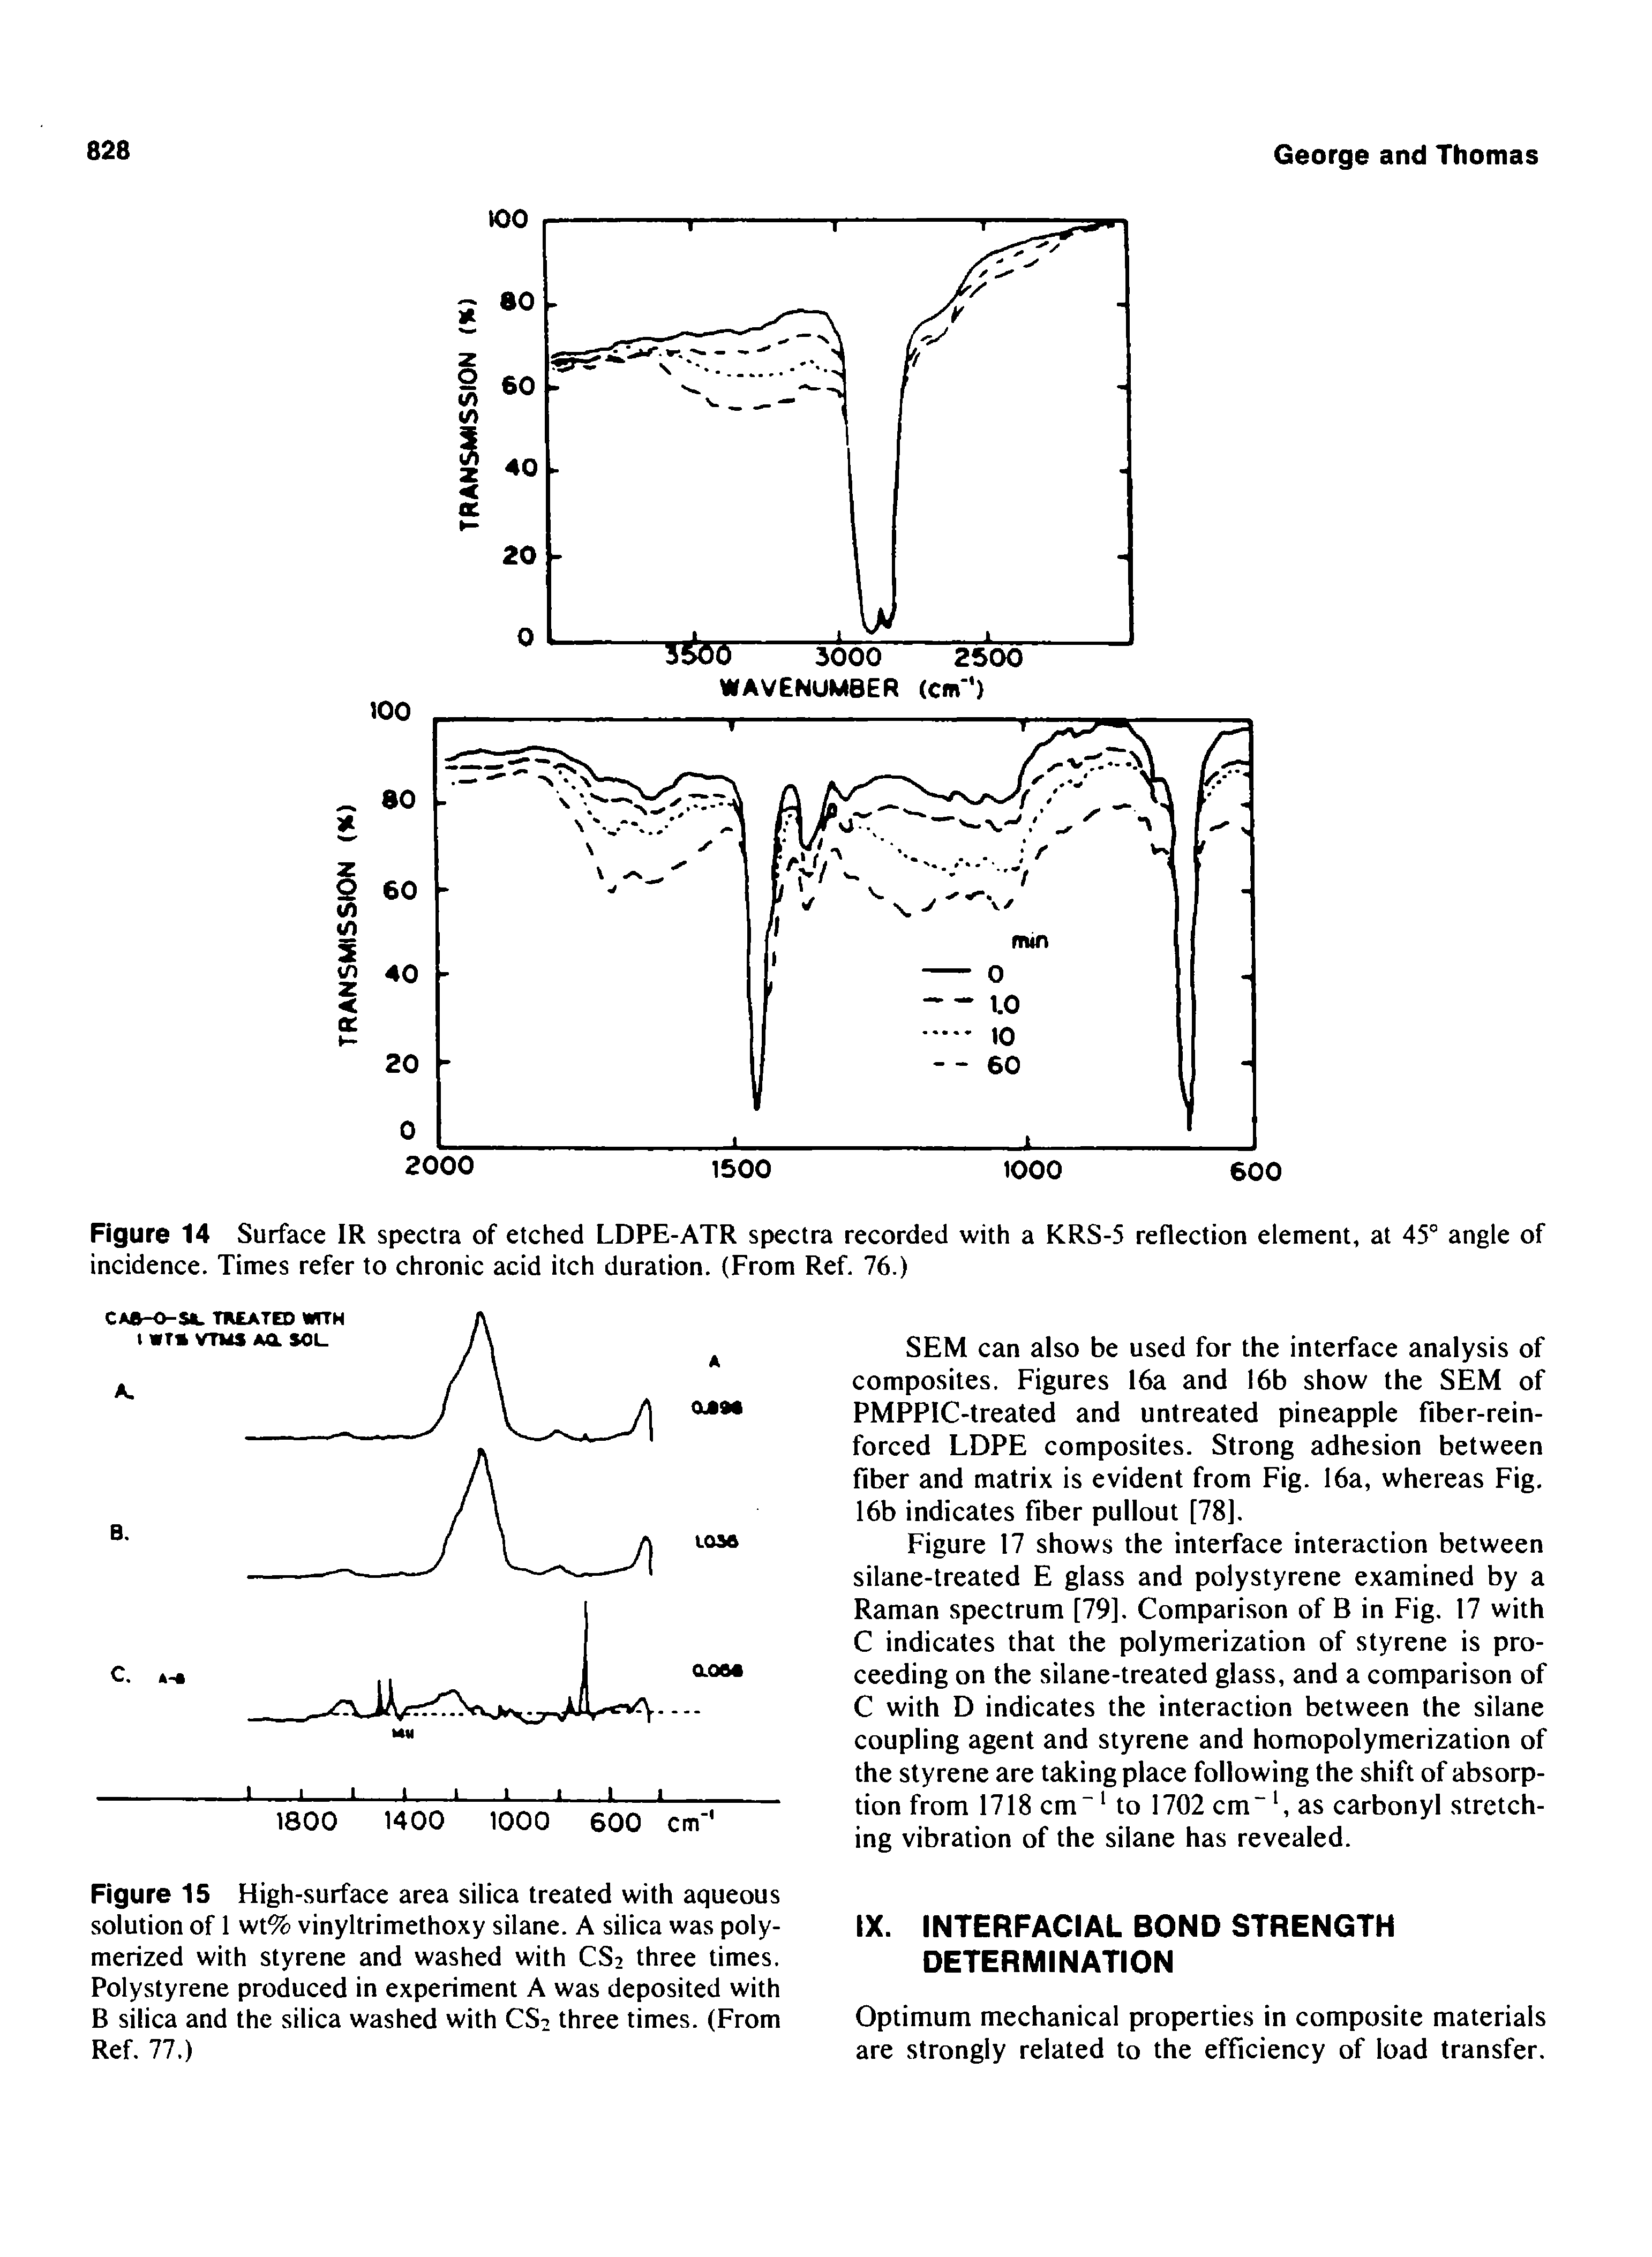 Figure 15 High-surface area silica treated with aqueous solution of 1 wt% vinyltrimethoxy silane. A silica was polymerized with styrene and washed with CS2 three times. Polystyrene produced in experiment A was deposited with B silica and the silica washed with CS2 three times. (From Ref. 77.)...